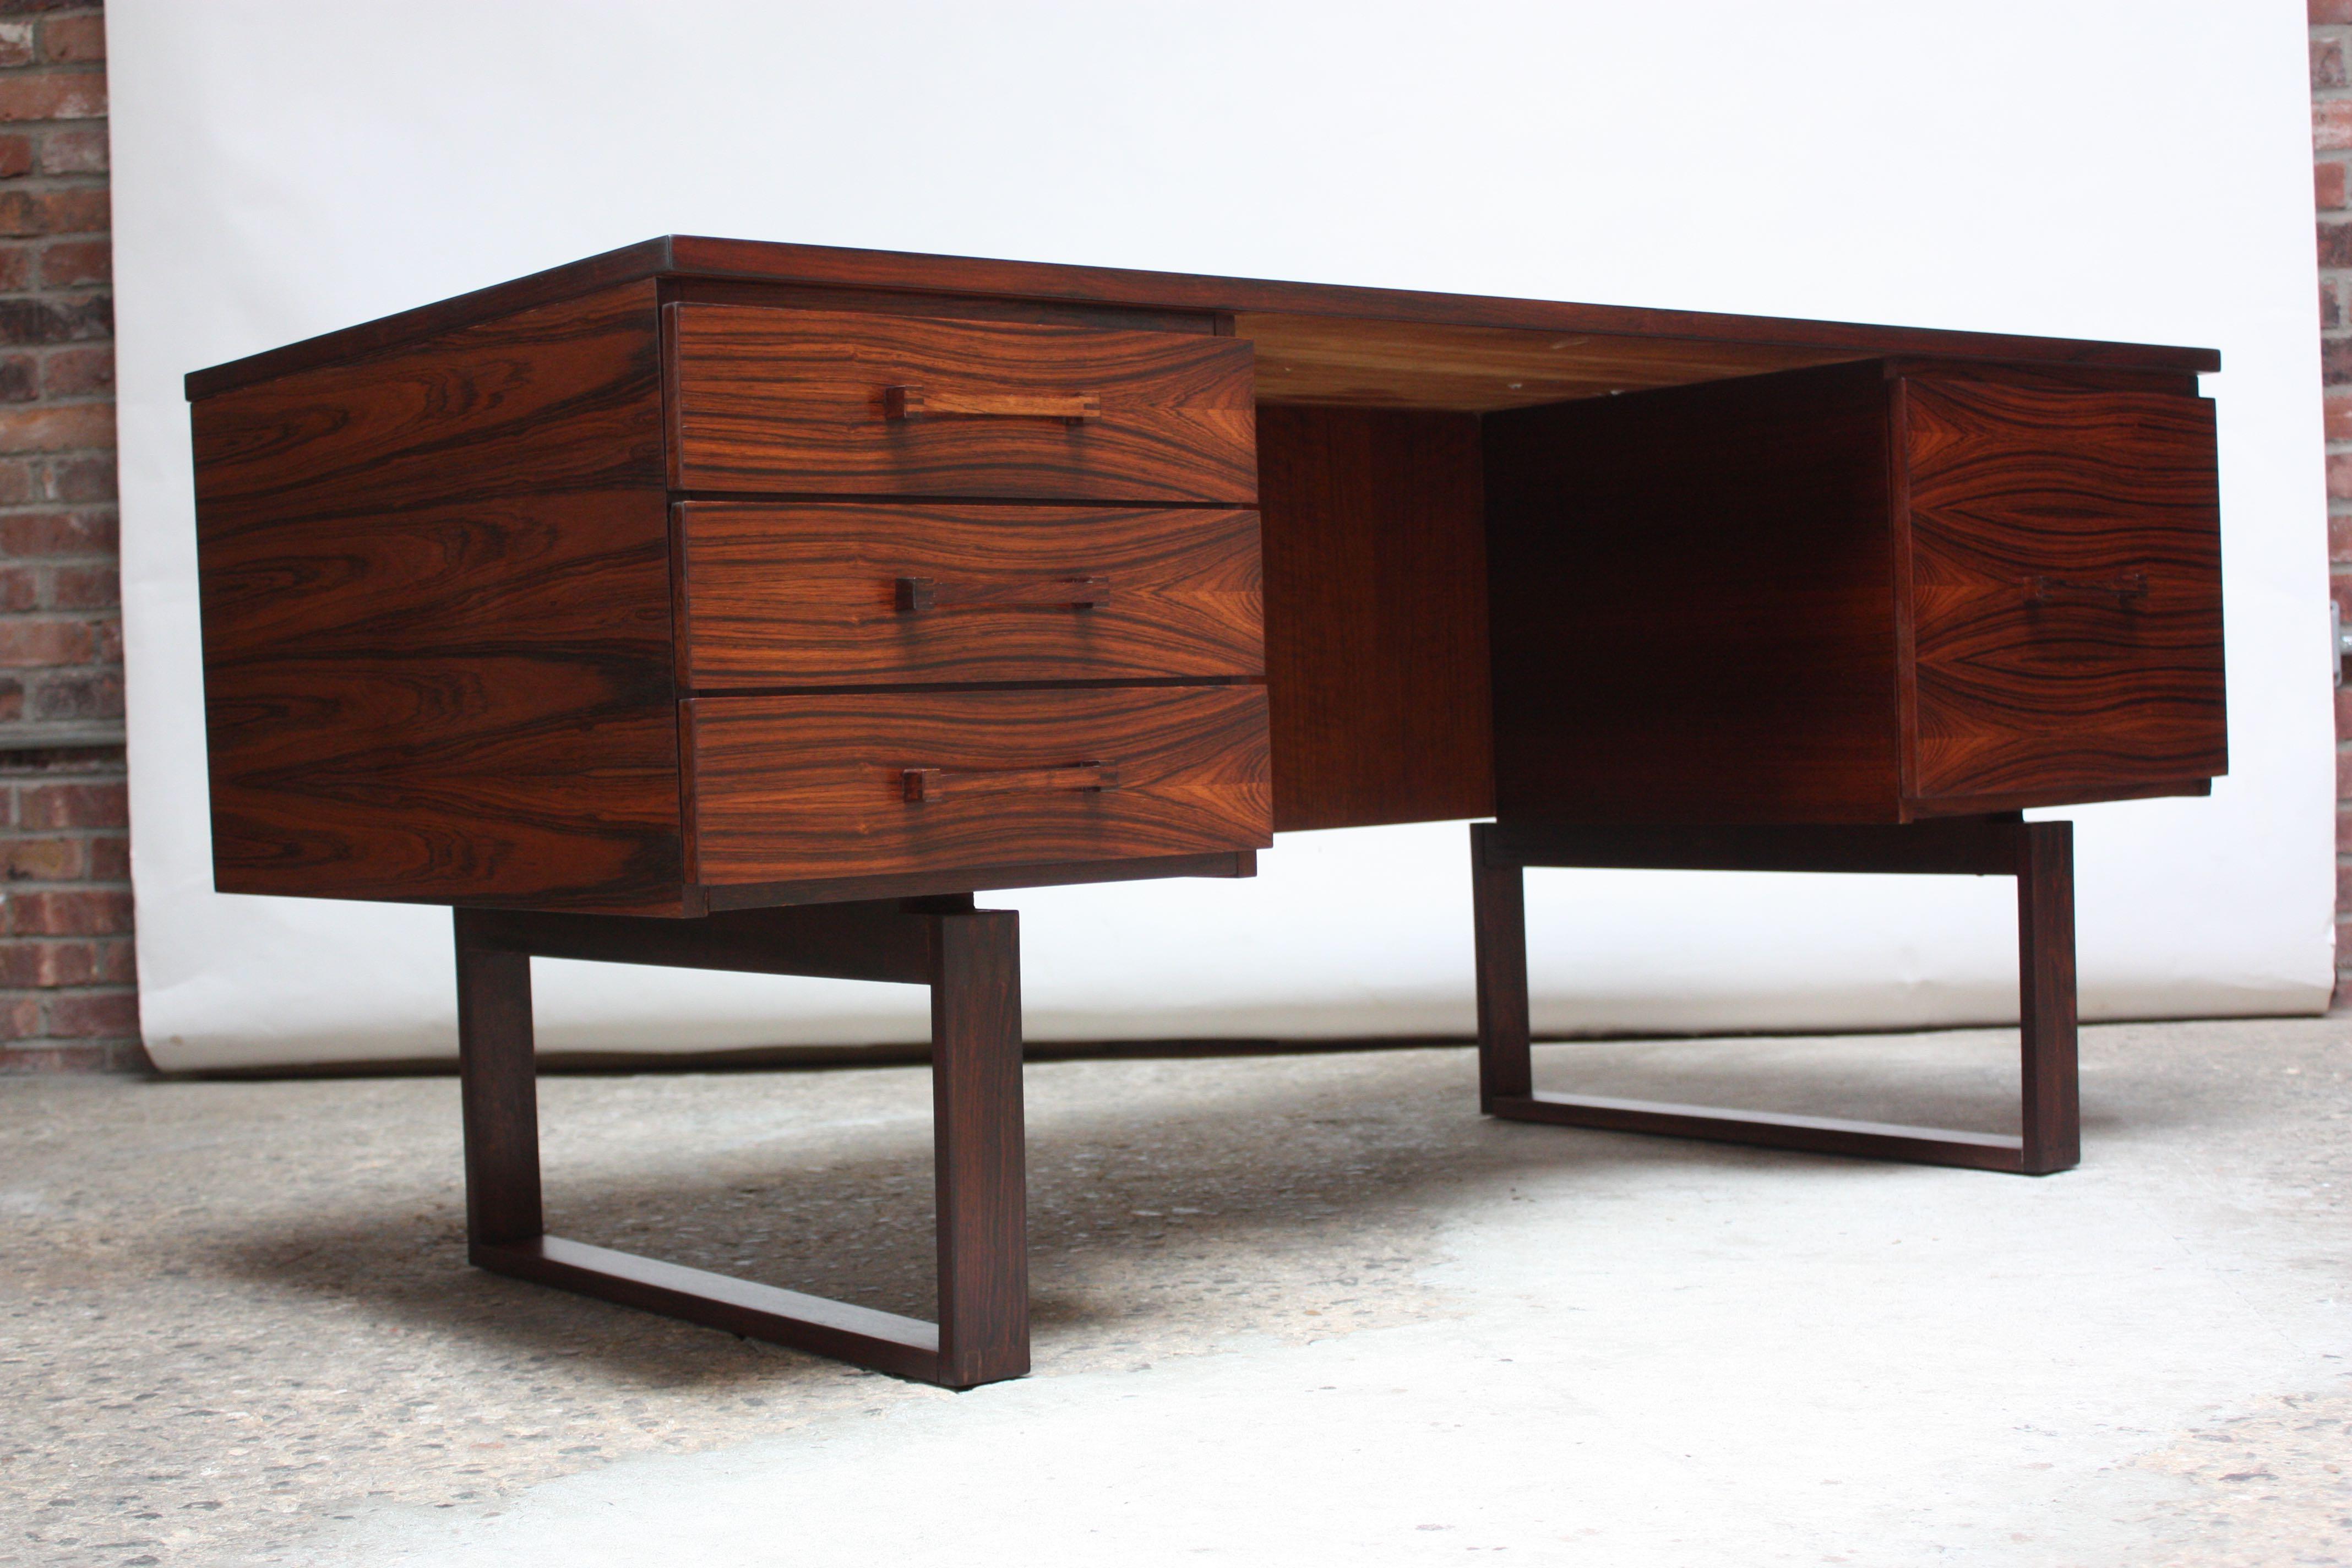 Henning Jensen and Torben Valeur rosewood desk for Dyrlund. Unique details include two carved rectangular bases which give the desk itself a floating, light-weight appearance. Ample storage with three drawers and a separate filing cabinet